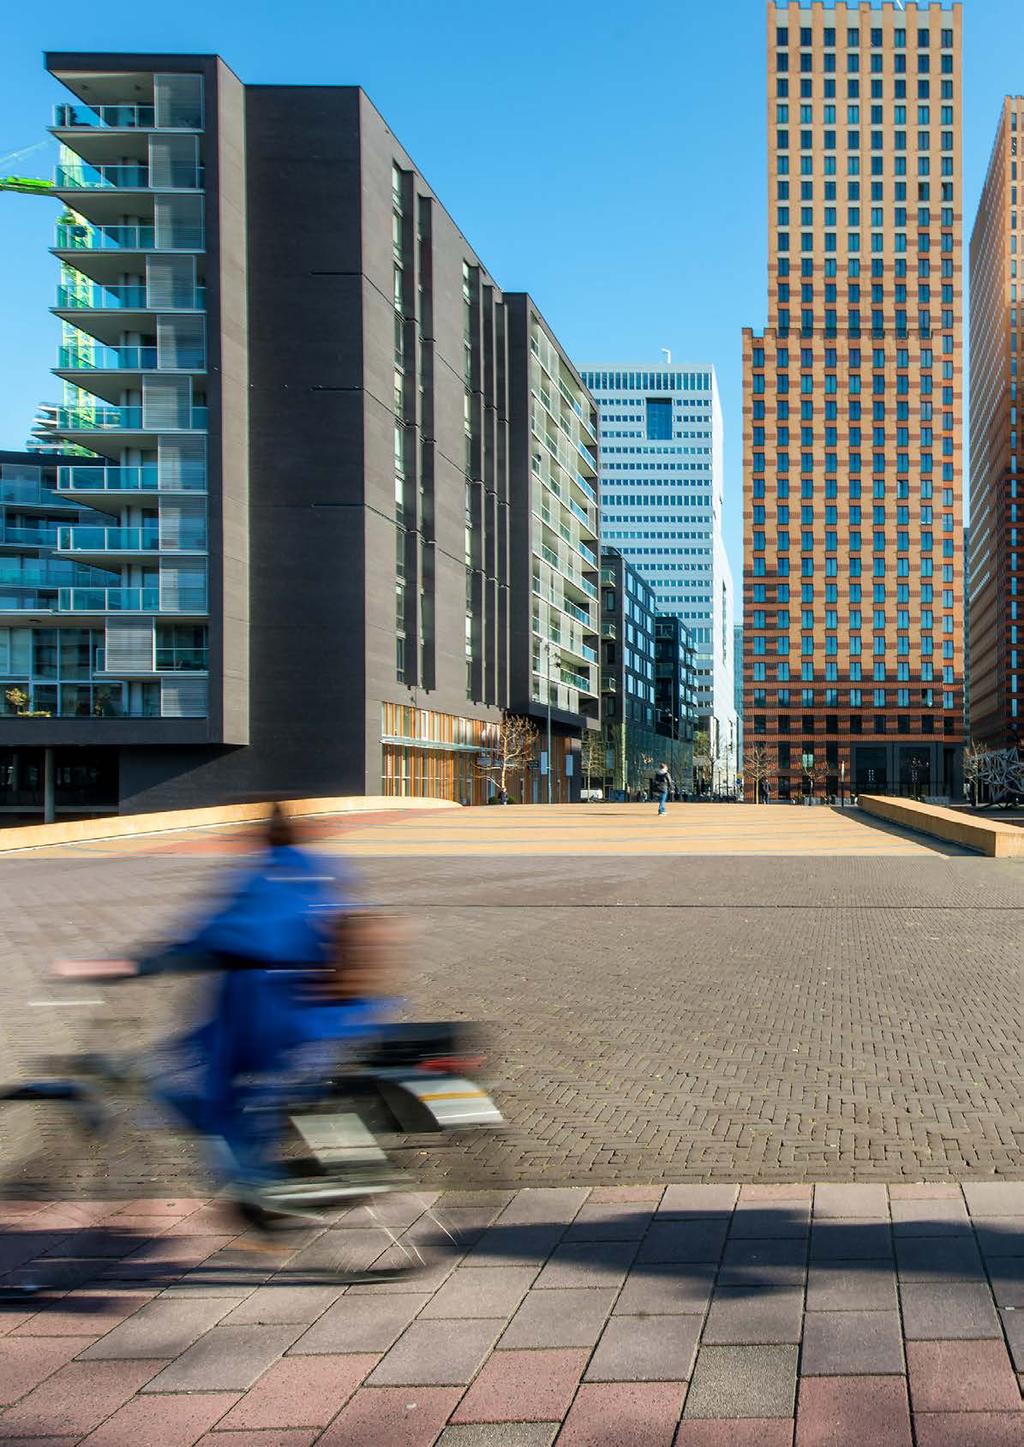 30 Amsterdam the hub of the Holland Metropole Amsterdam is an example of a high-quality city that is now leveraging the borrowed scale, diversity and knowledge of its wider region now referred to as